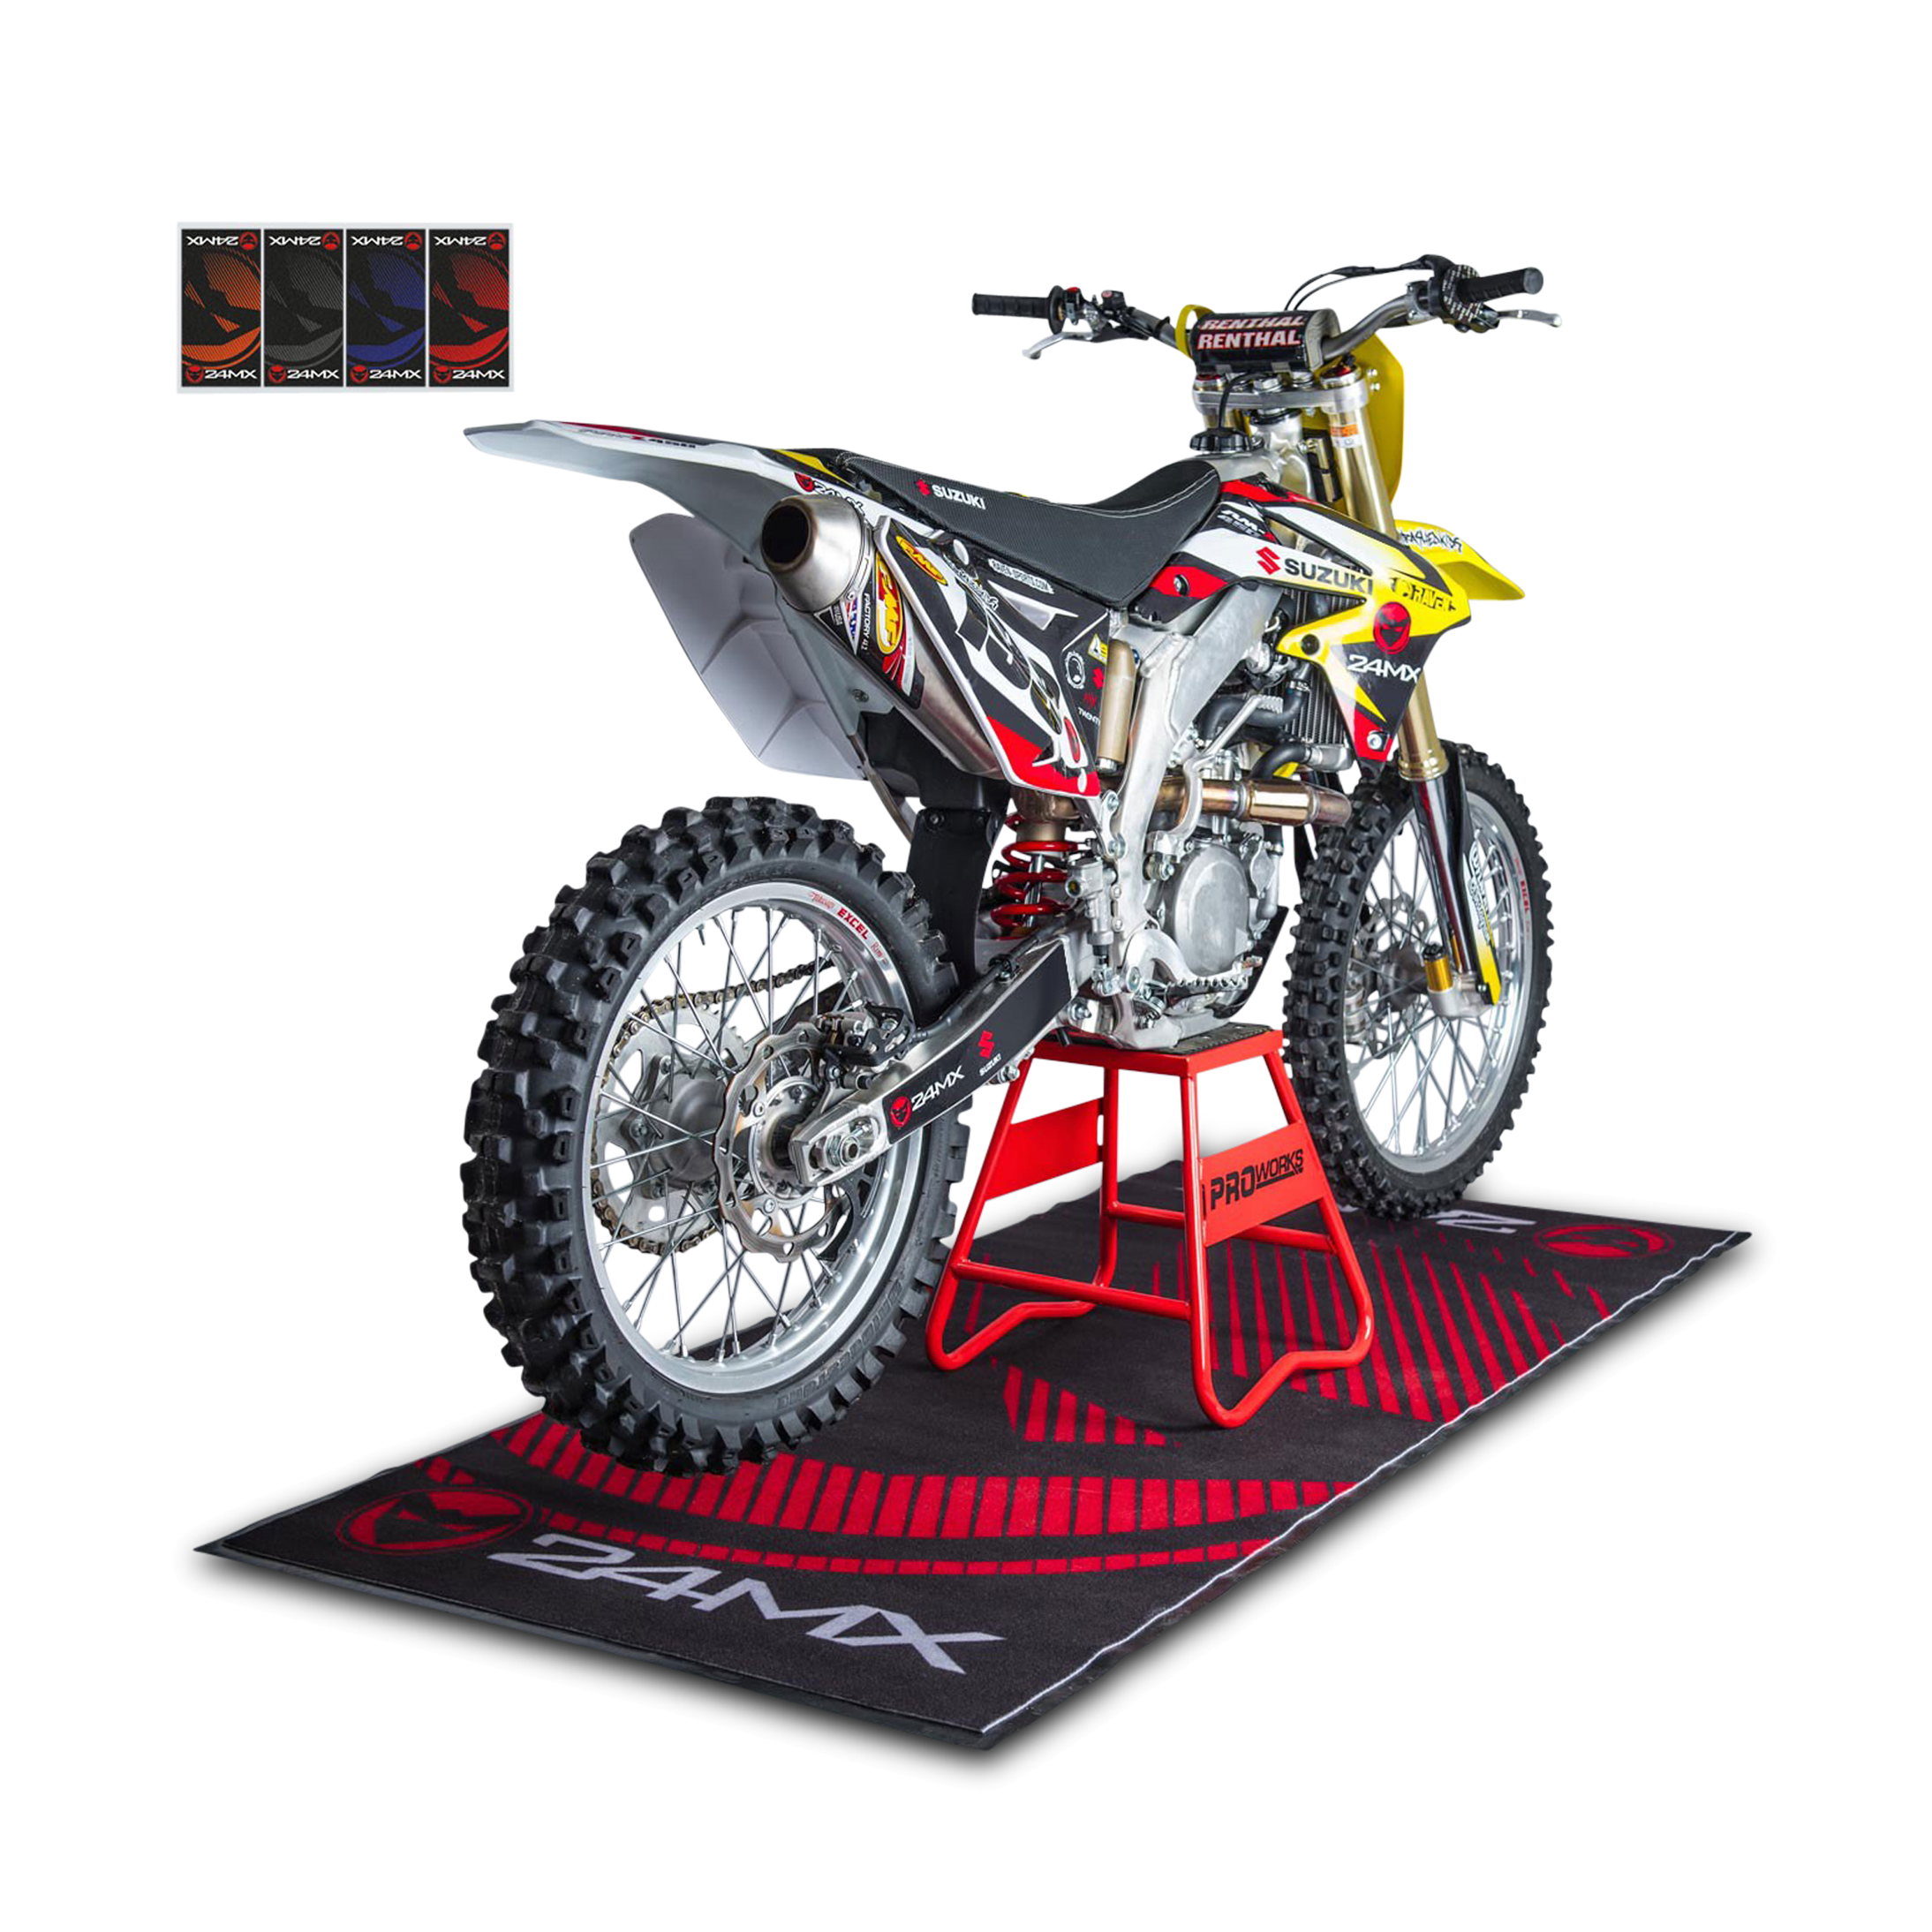 Get the best-selling 24MX.com pit mat for more than half price